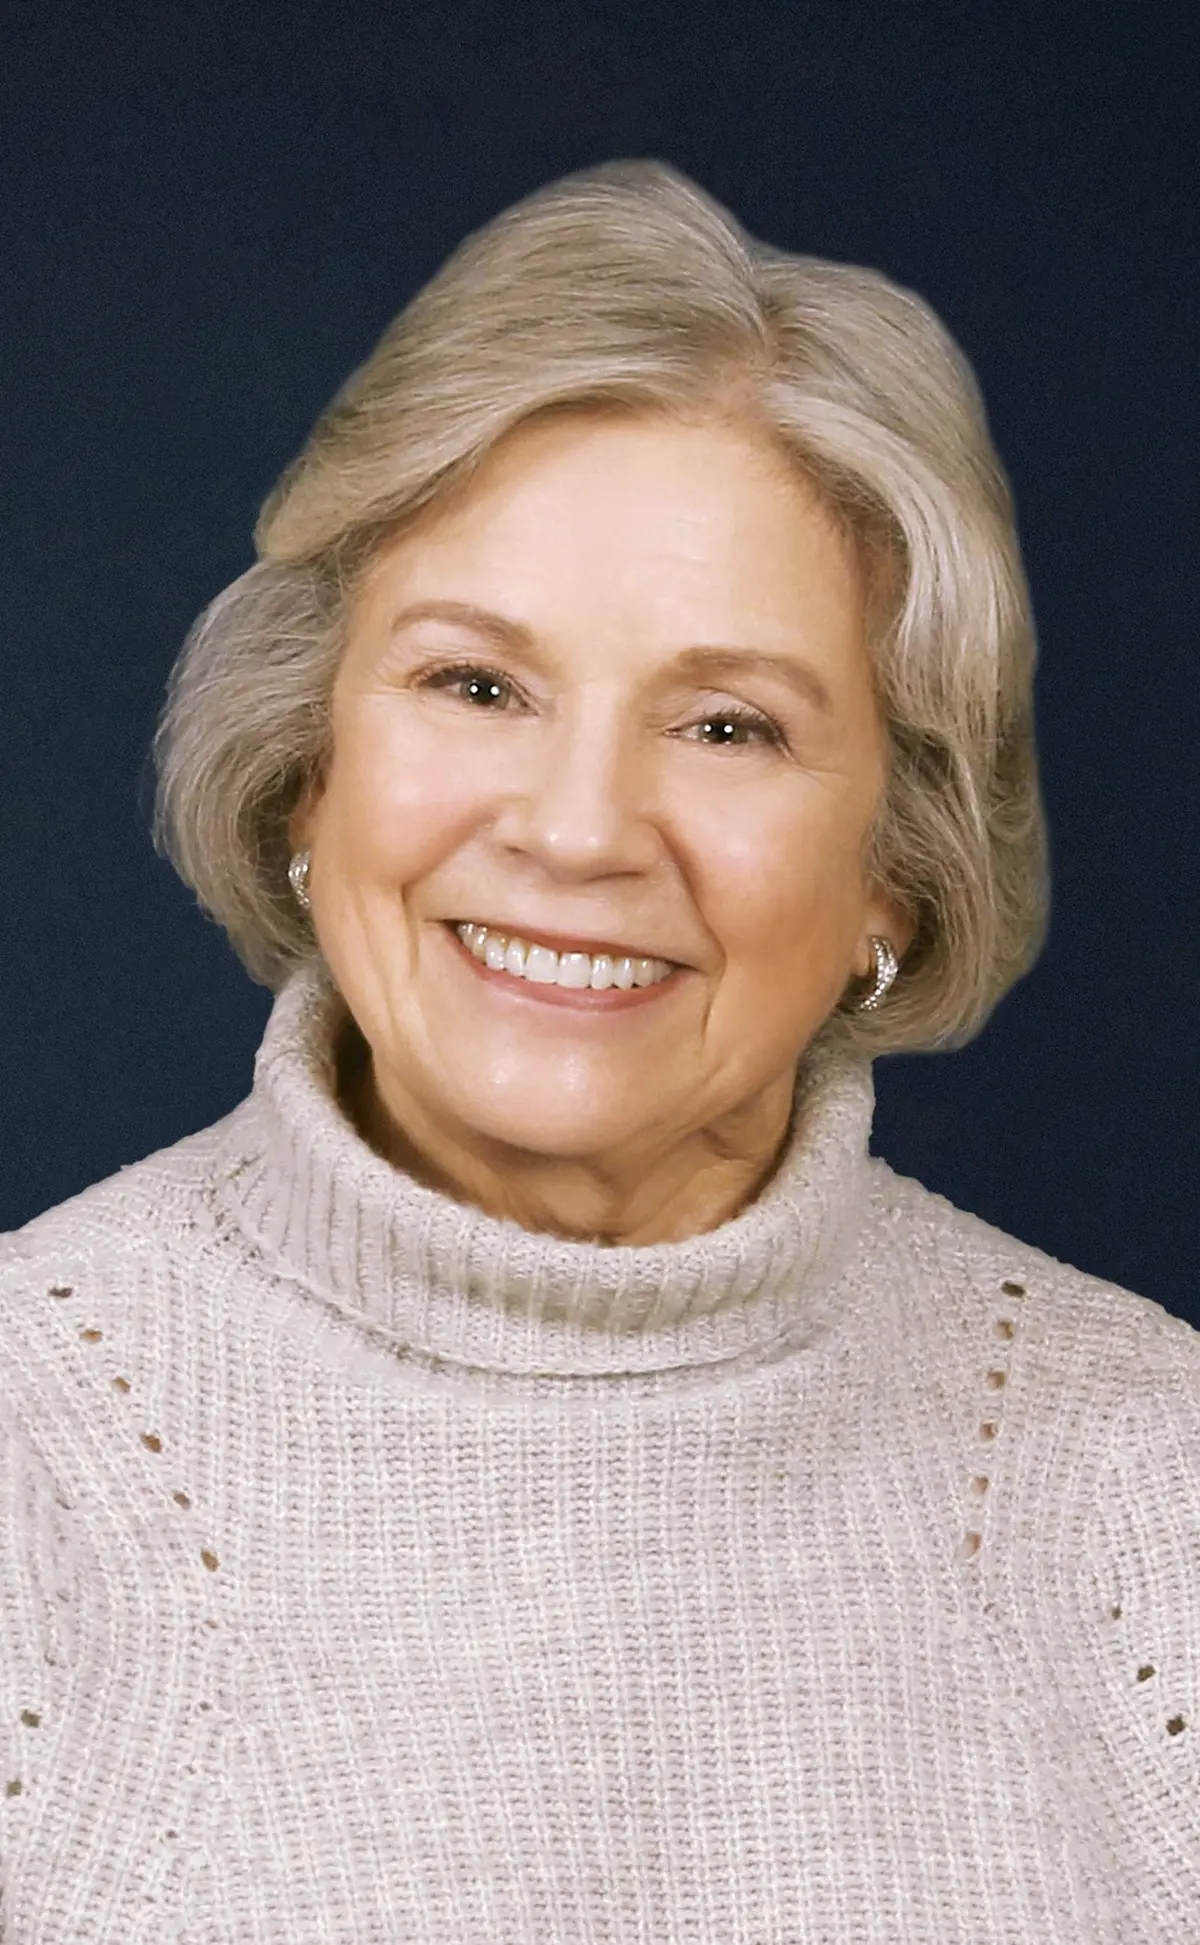 Portrait headshot close-up photograph view of Judith Droz Keyes smiling in a dark beige/cream colored turtleneck cardigan top and has on silver colored small circular earrings